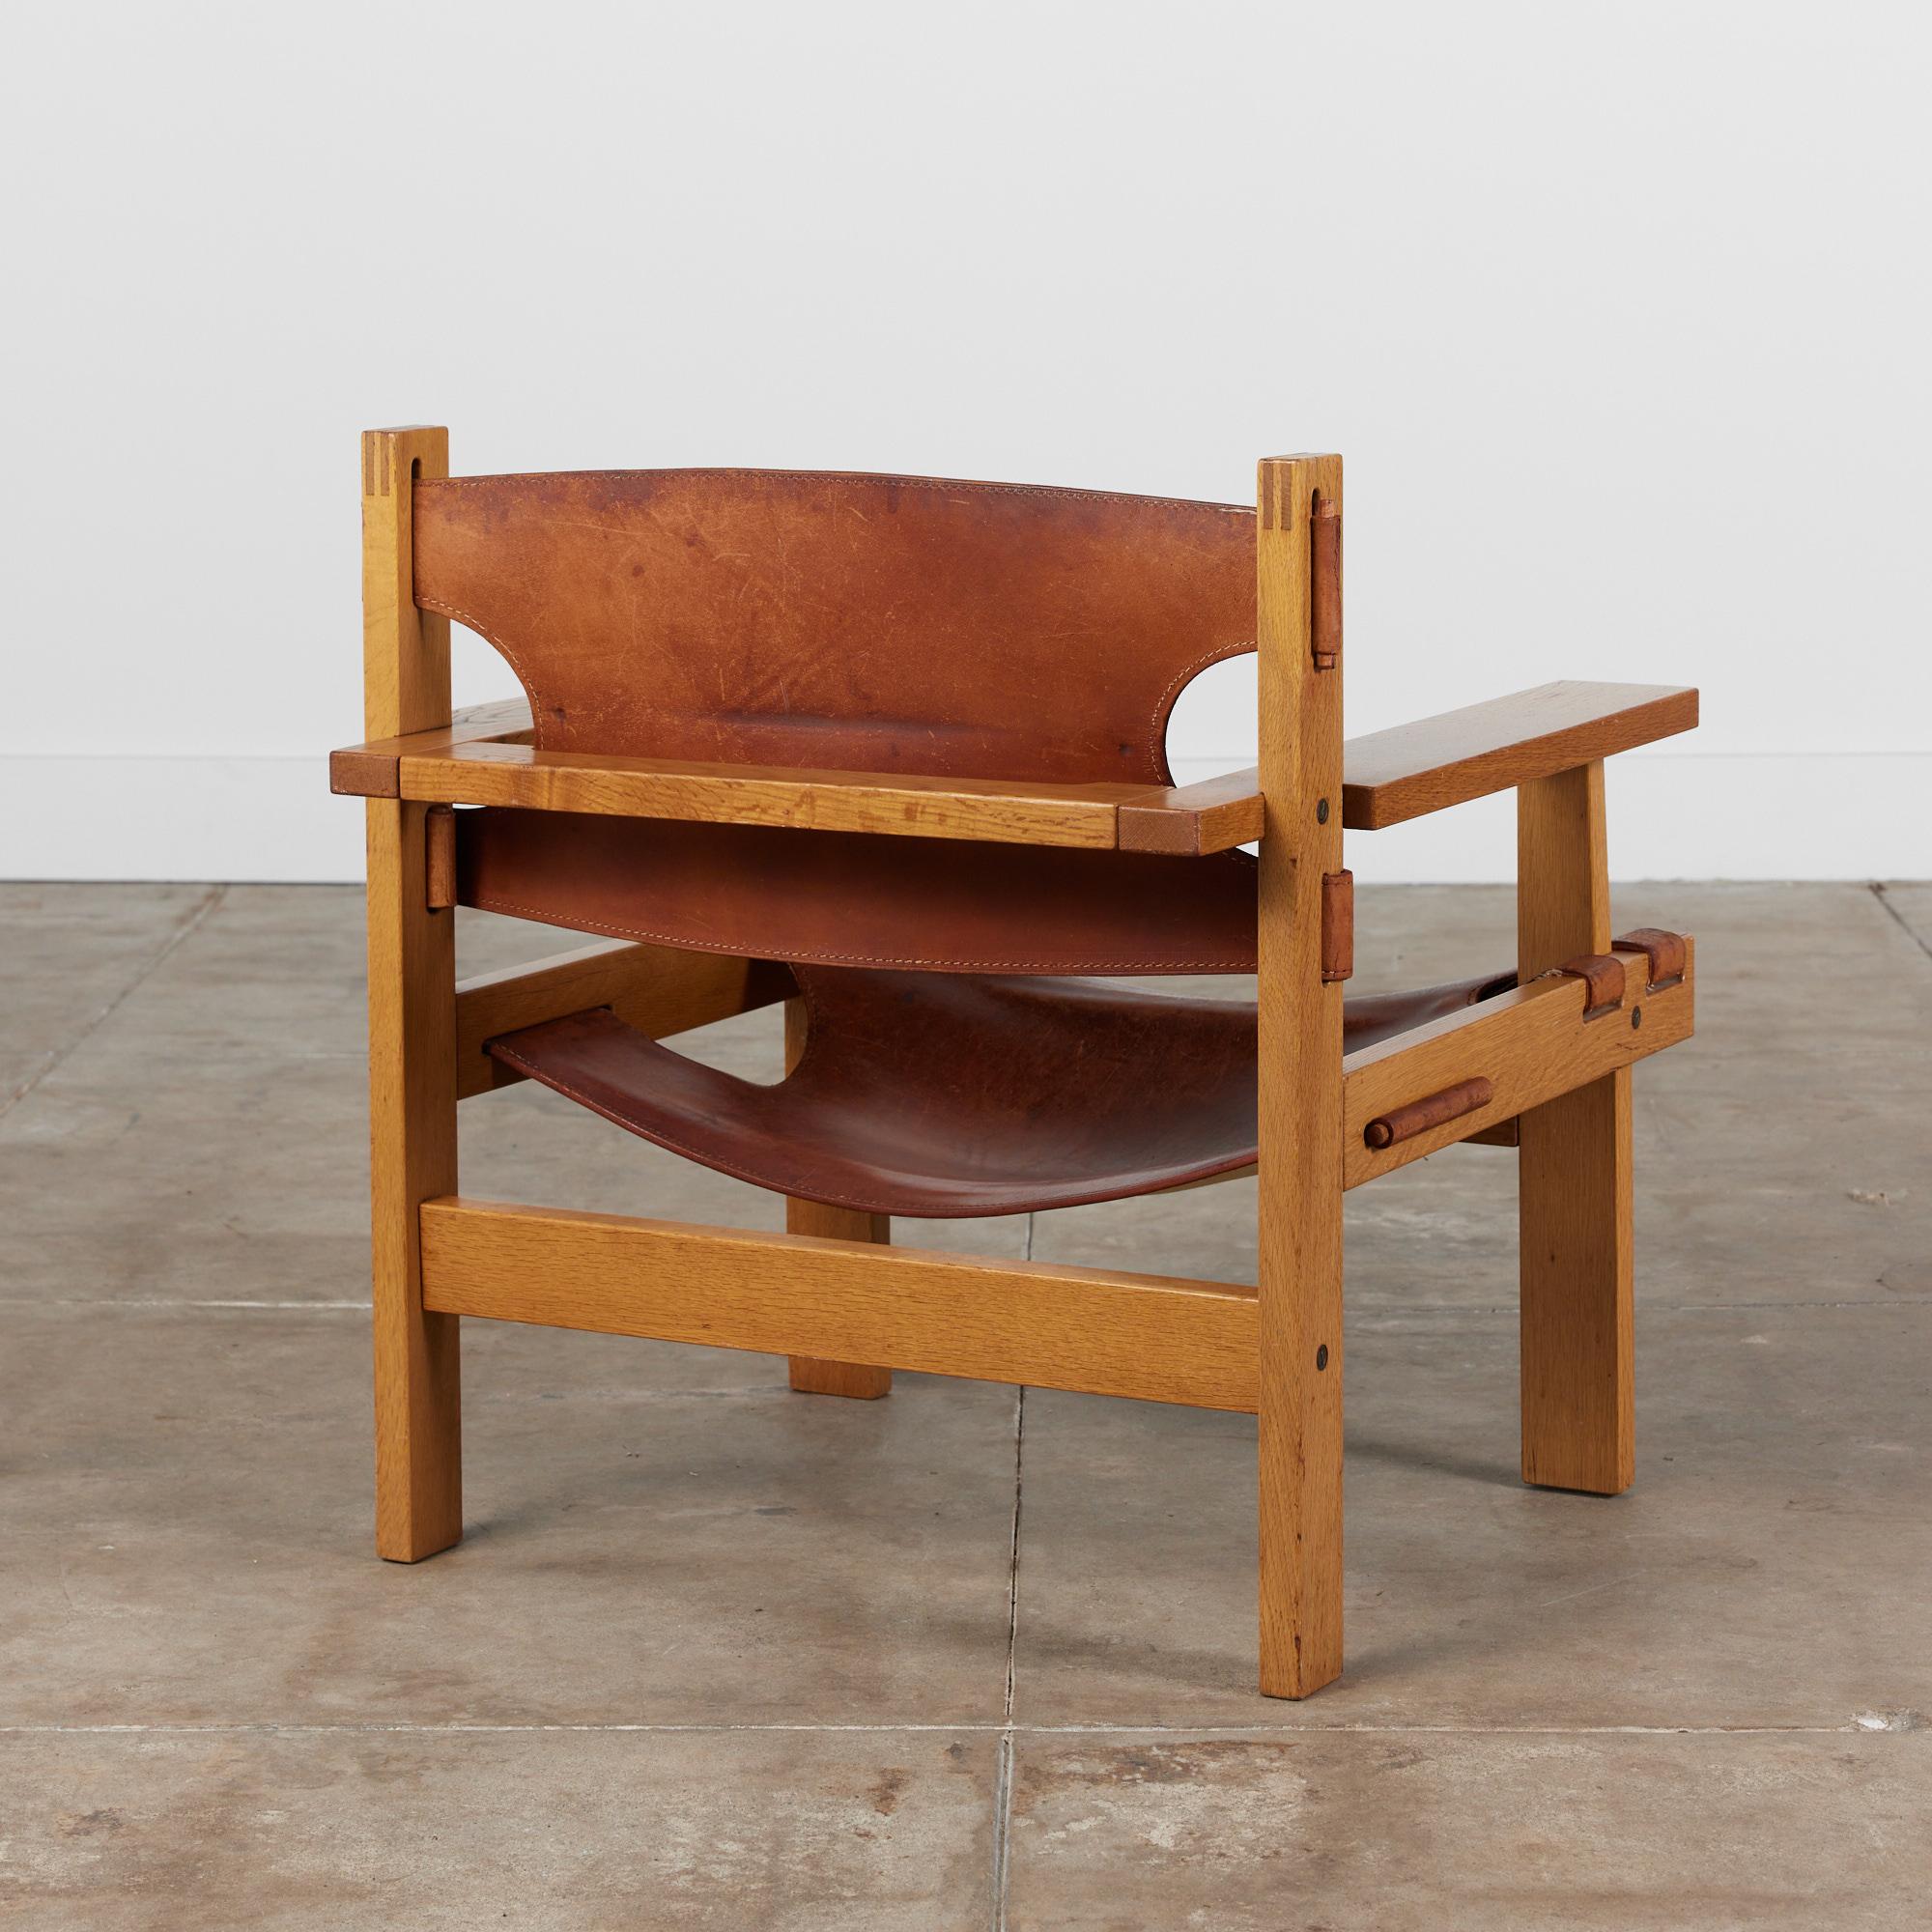 20th Century Gunnar H. Guðmundsson Leather Sling Chair For Sale